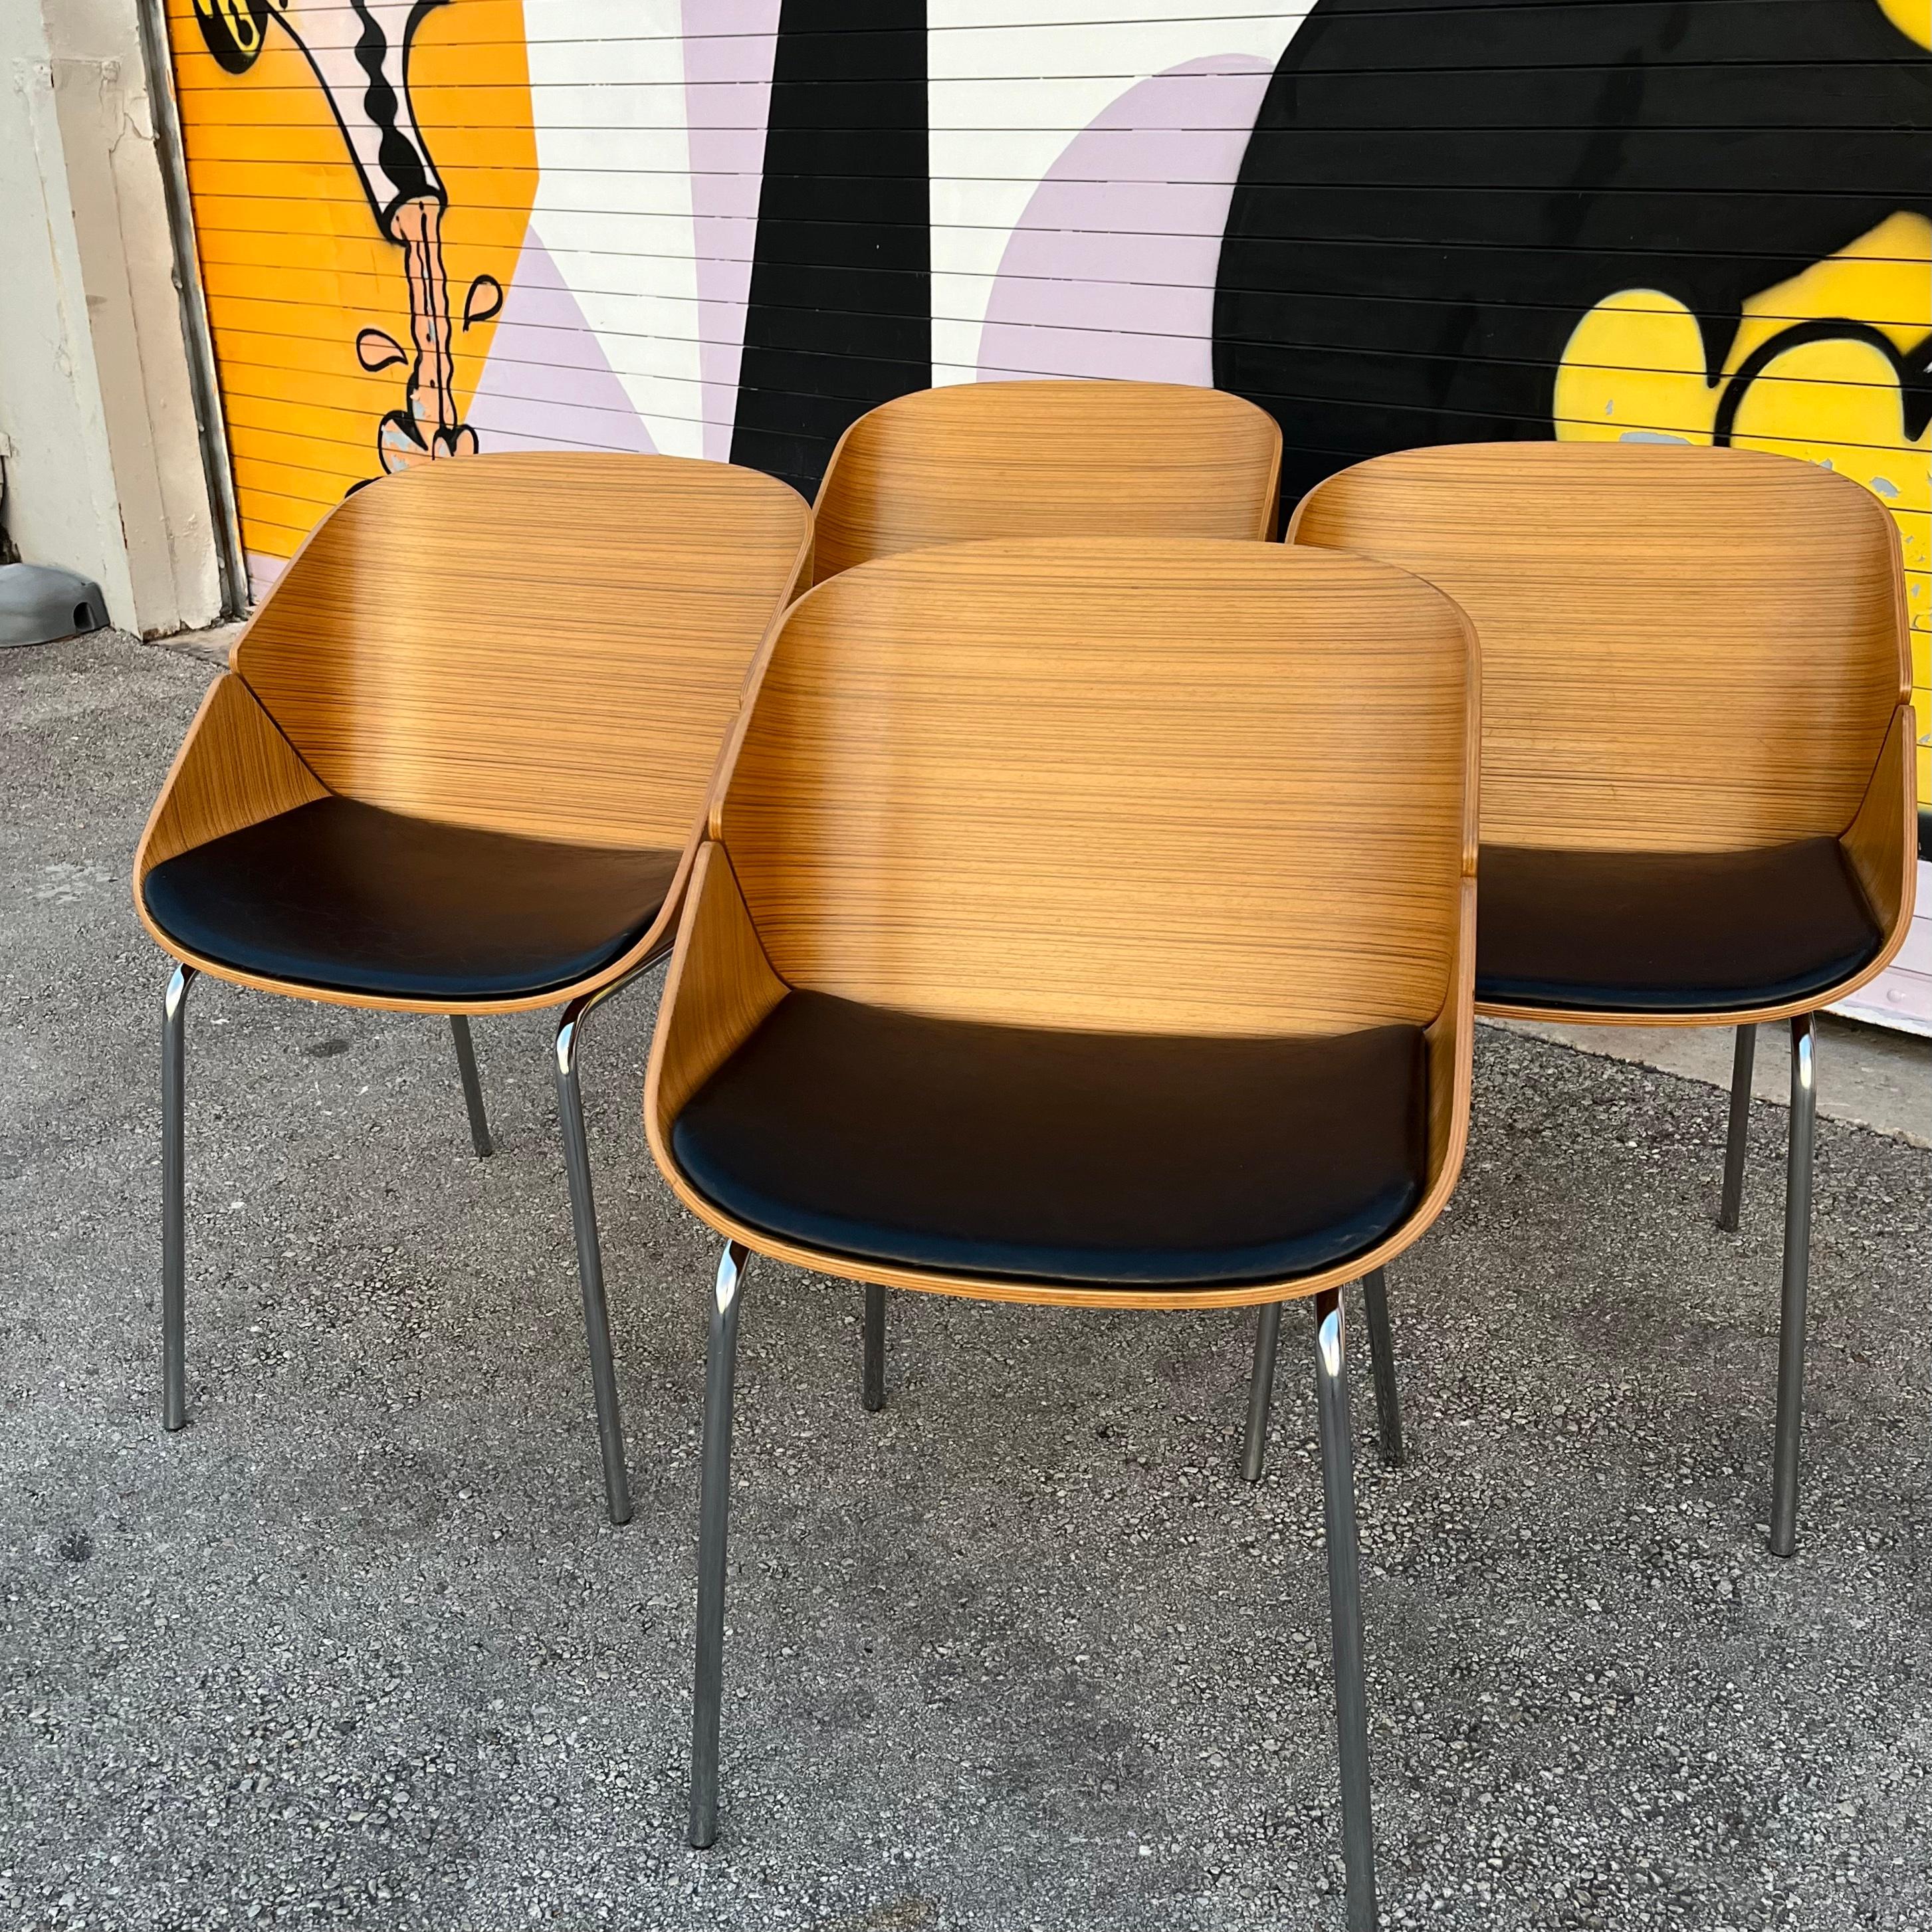 Set of 4 Early 21st Century Babà Lounge/ Dining Chairs by Plank Furniture Italy In Good Condition For Sale In Miami, FL